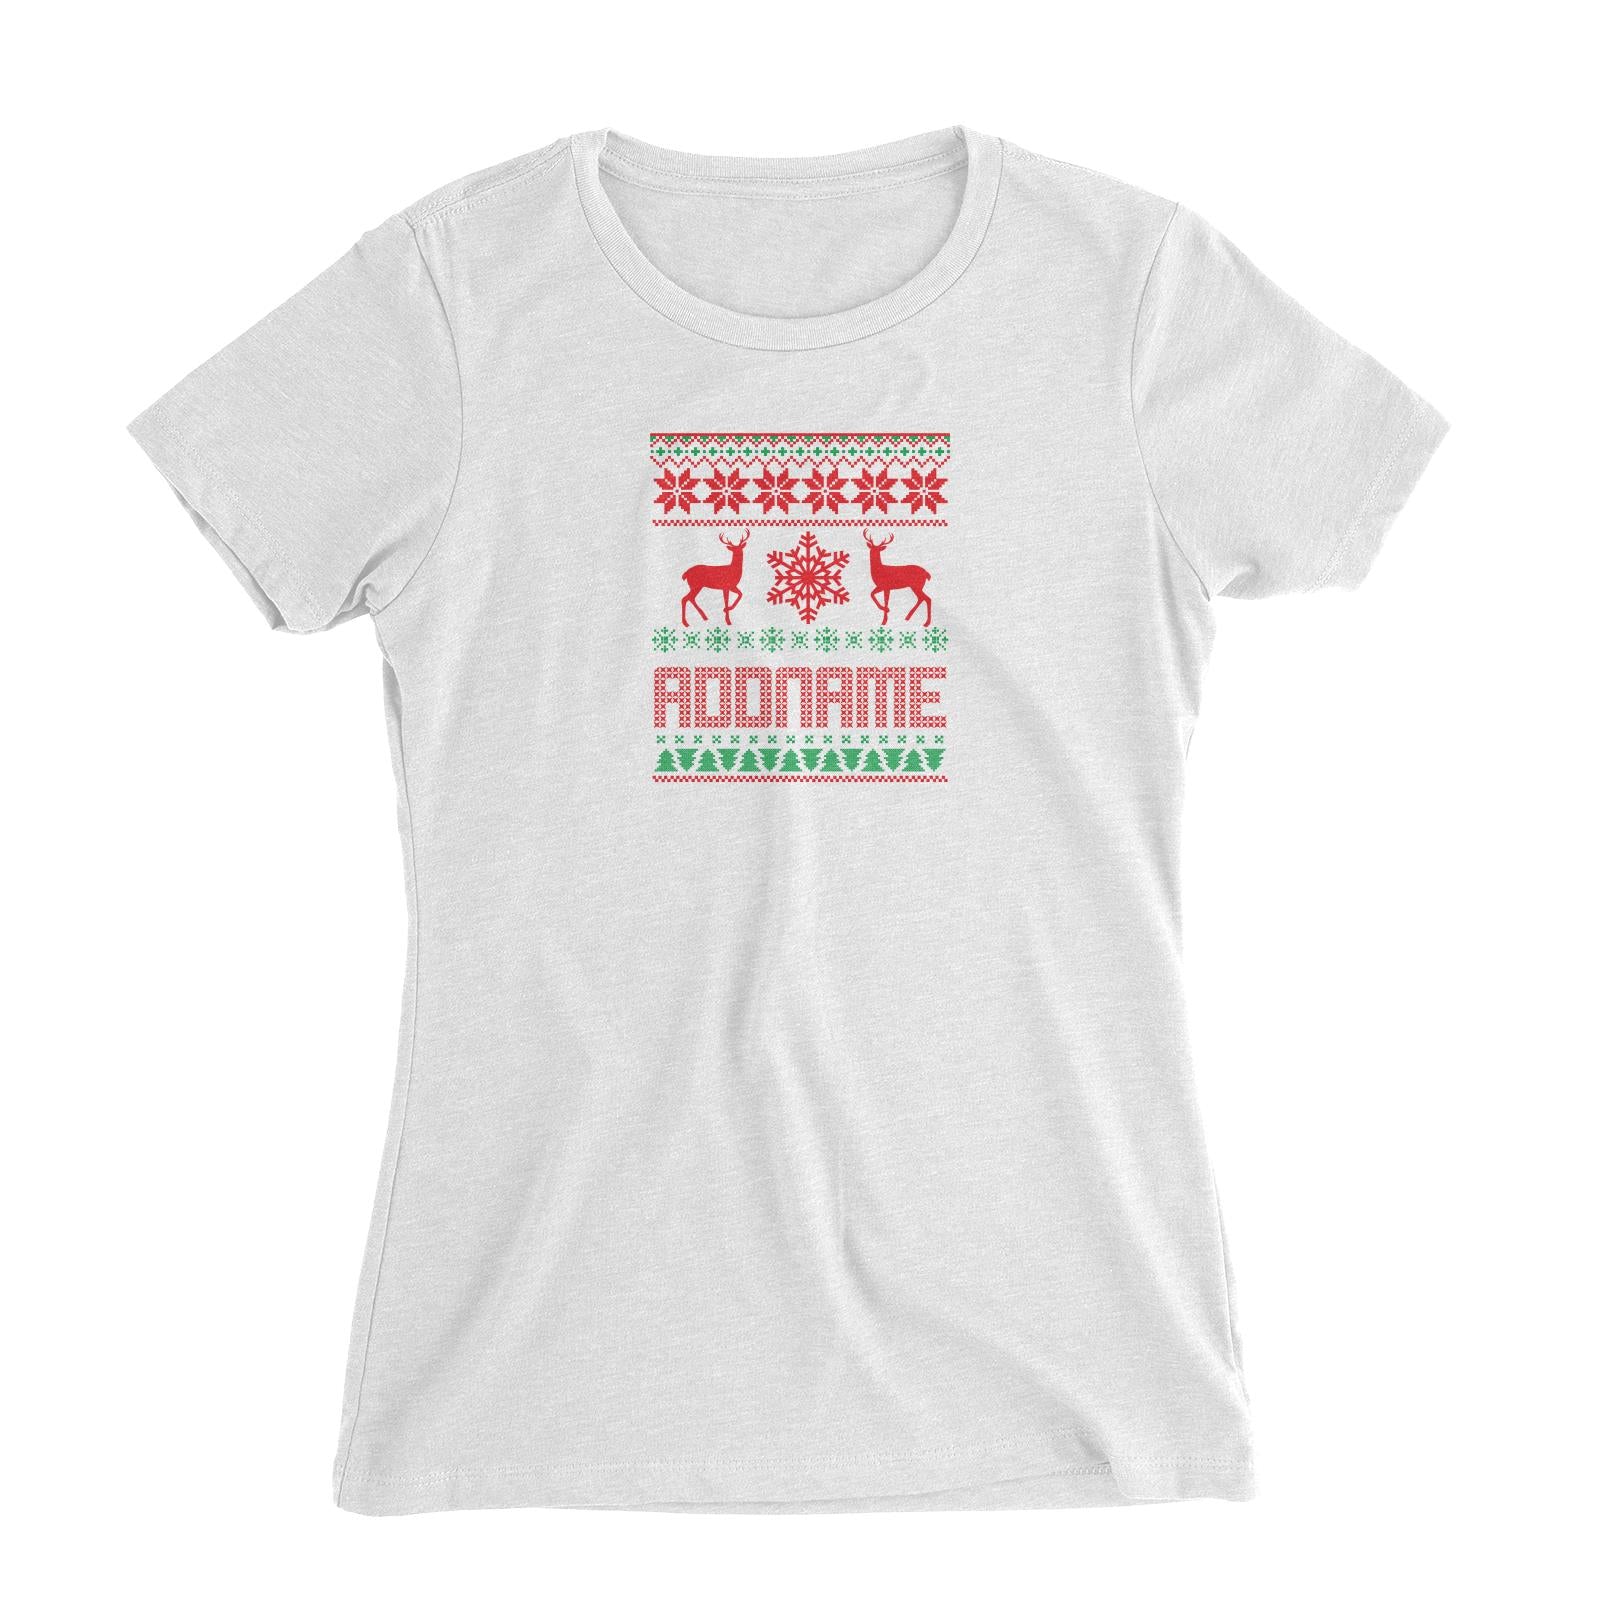 Christmas Series Sweater with Deer Women's Slim Fit T-Shirt